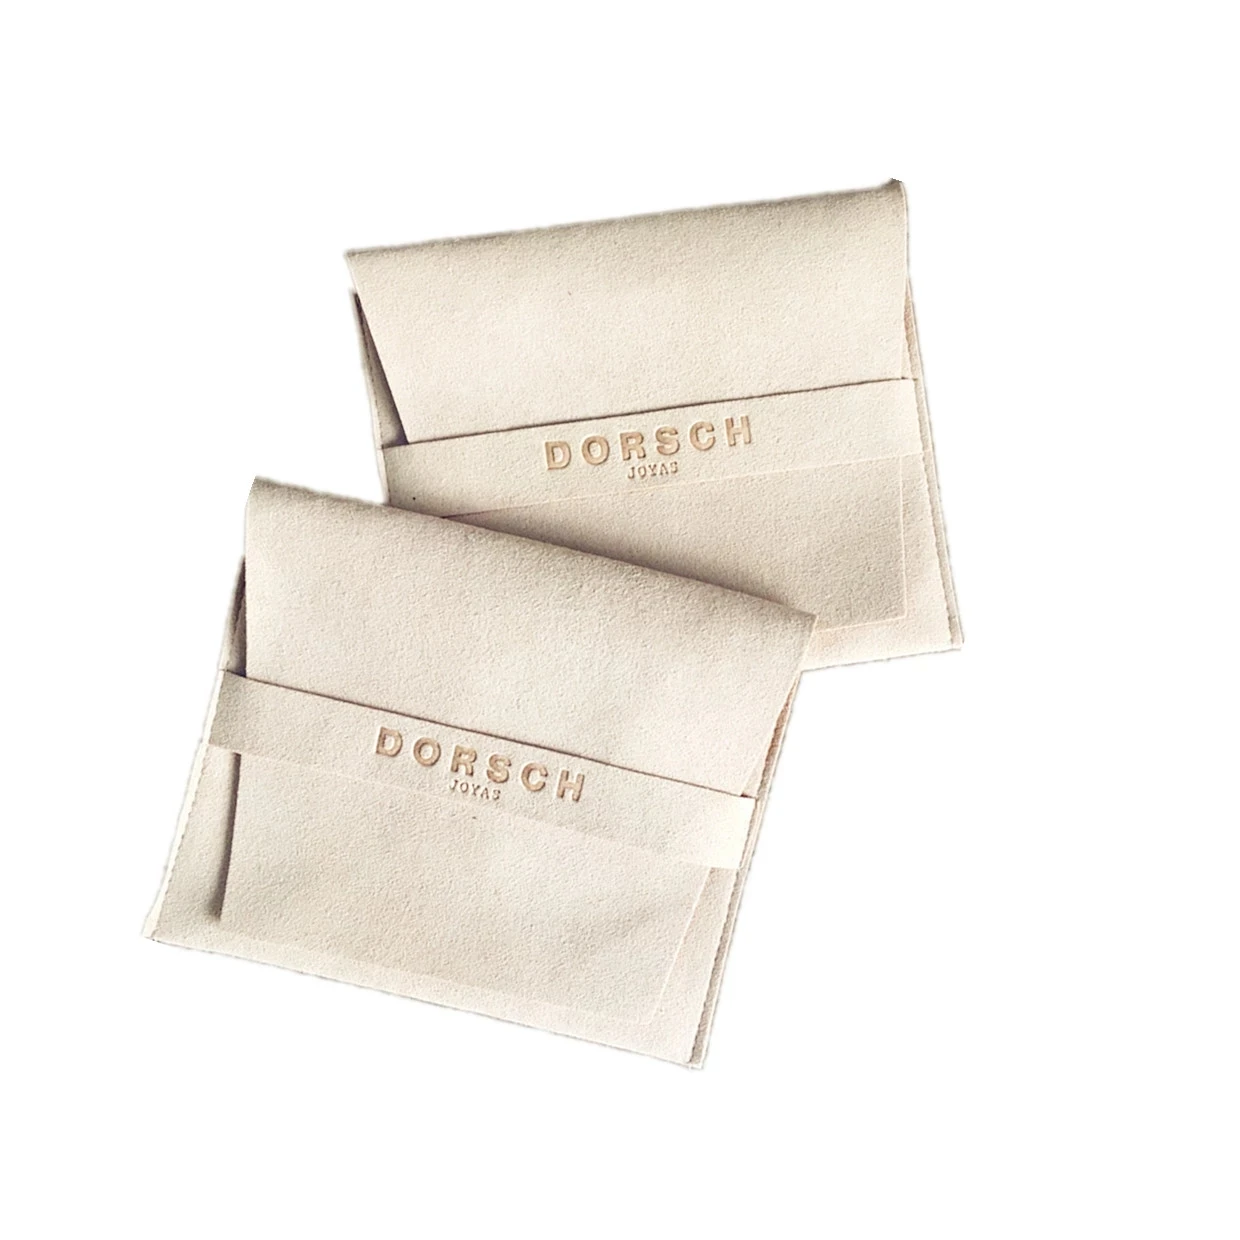 50pcs ivory color custom personalized embossed logo printing microfiber jewelry bag bag custom jewelry packaging bag 20pcs 6x9cm printing kraft paper cards for earrings necklaces jewelry display packaging backing cardboard hanging price tag card